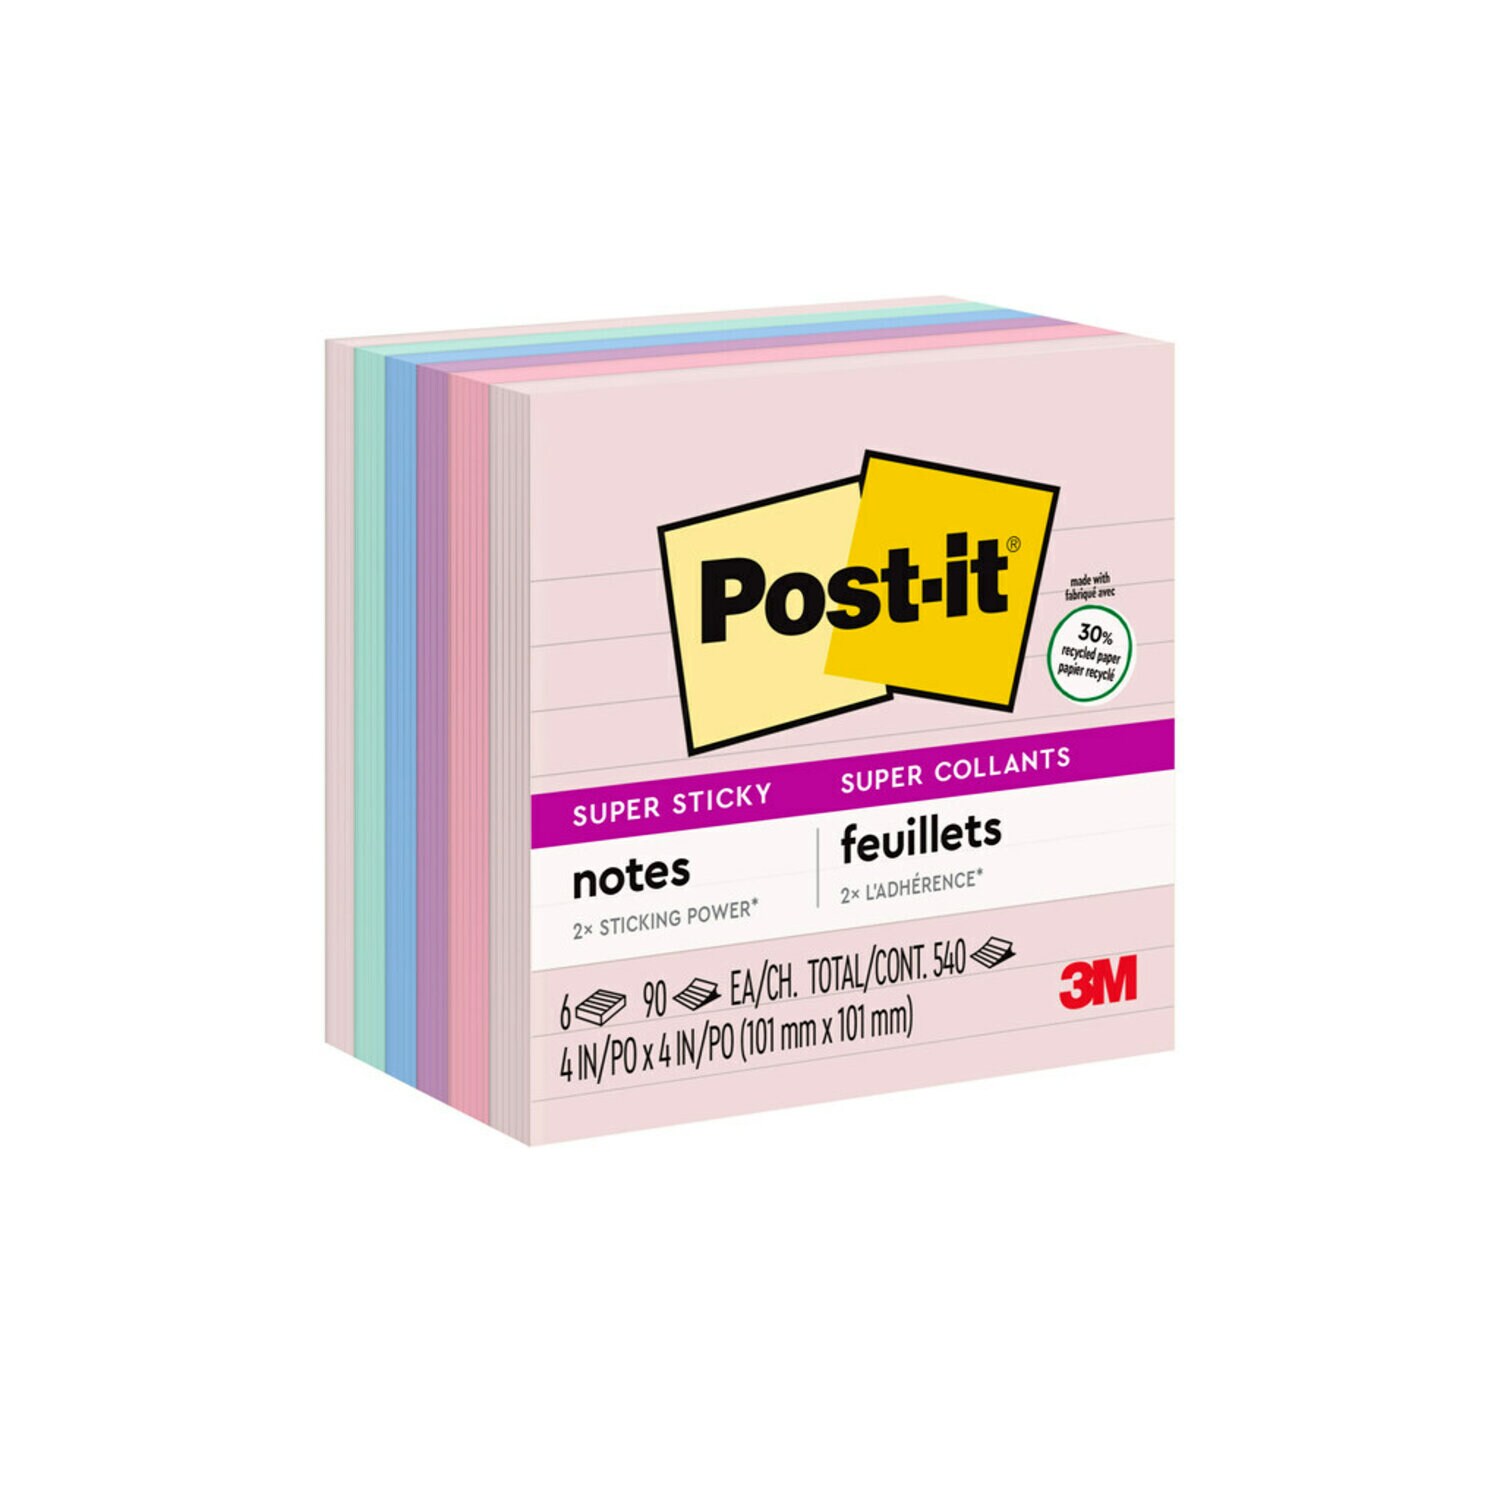 7010311465 - Post-it Super Sticky Recycled Notes 675-6SSNRP, 4 in x 4 in (101 mm x 101 mm), Wanderlust Pastels Collection, Lined, 6 Pads/Pack